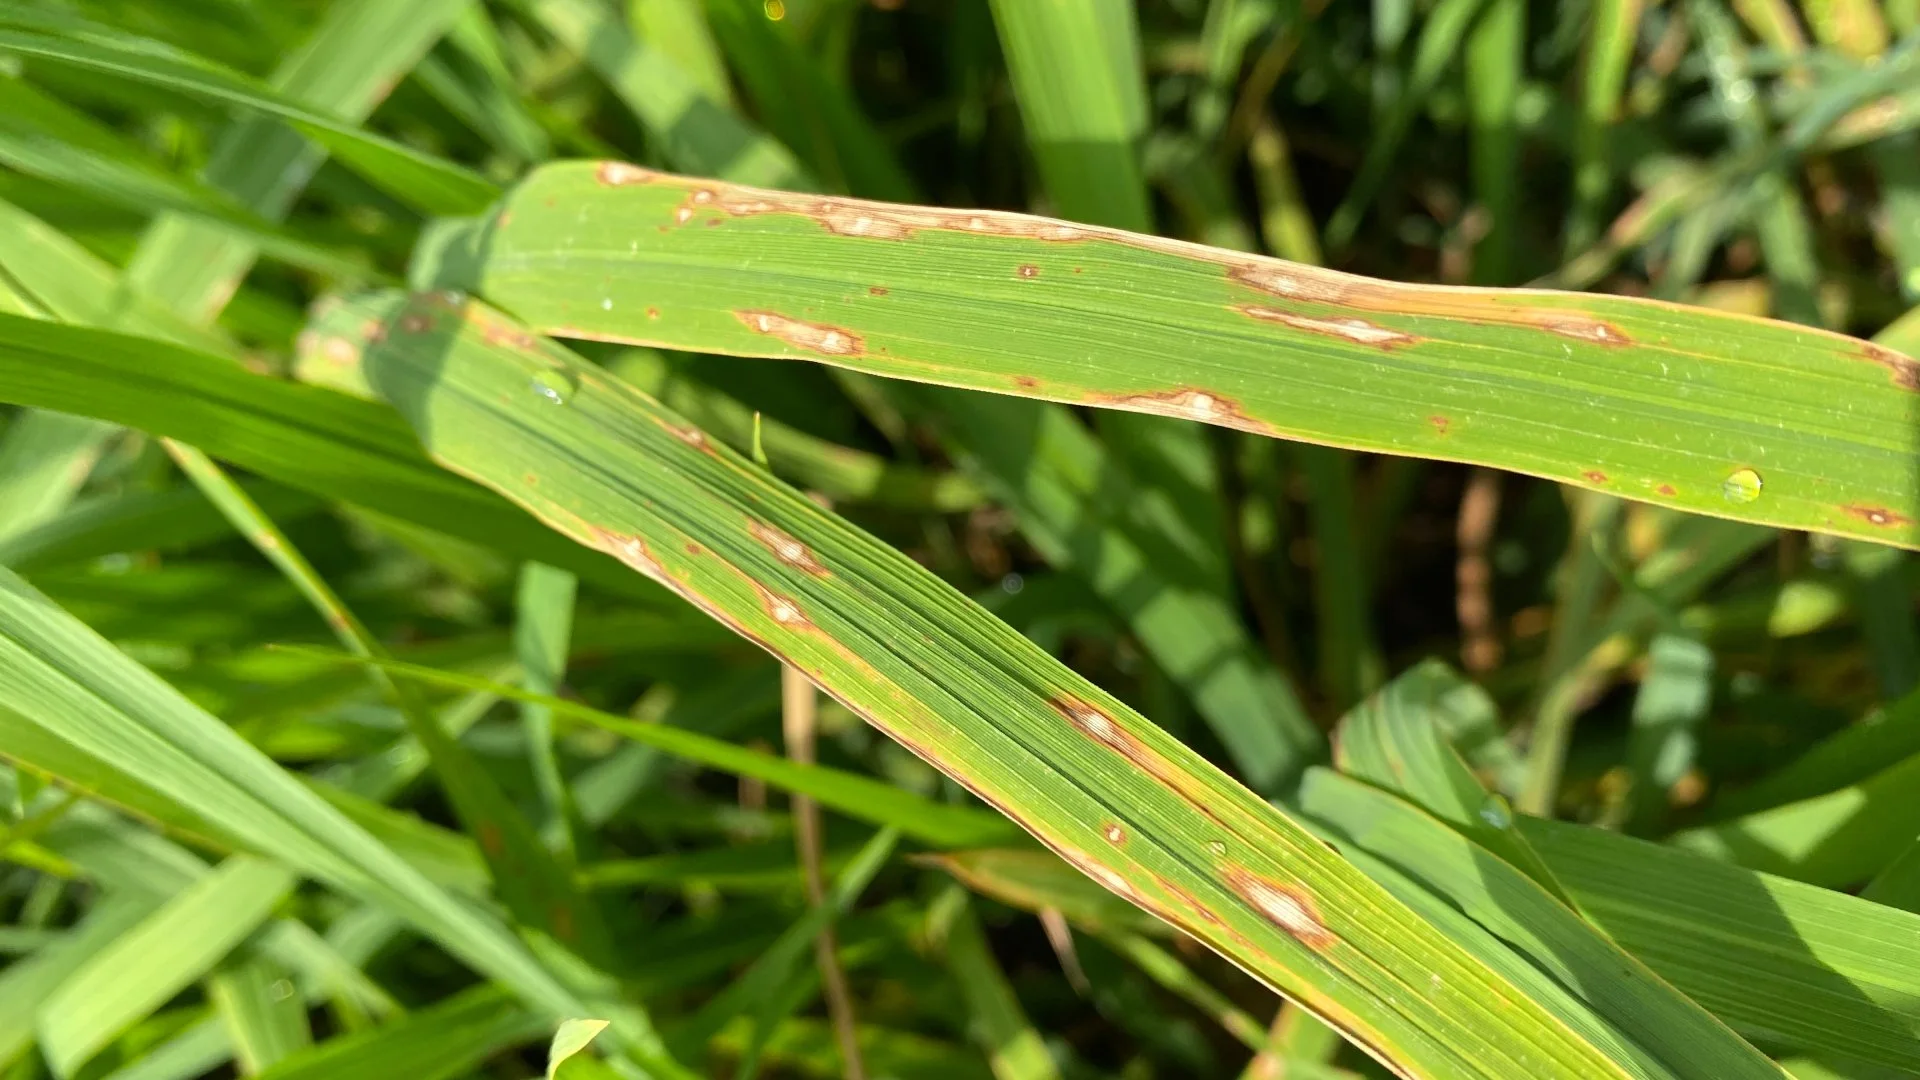 Ascochyta leaf blight found in client's lawn in Des Moines, IA.